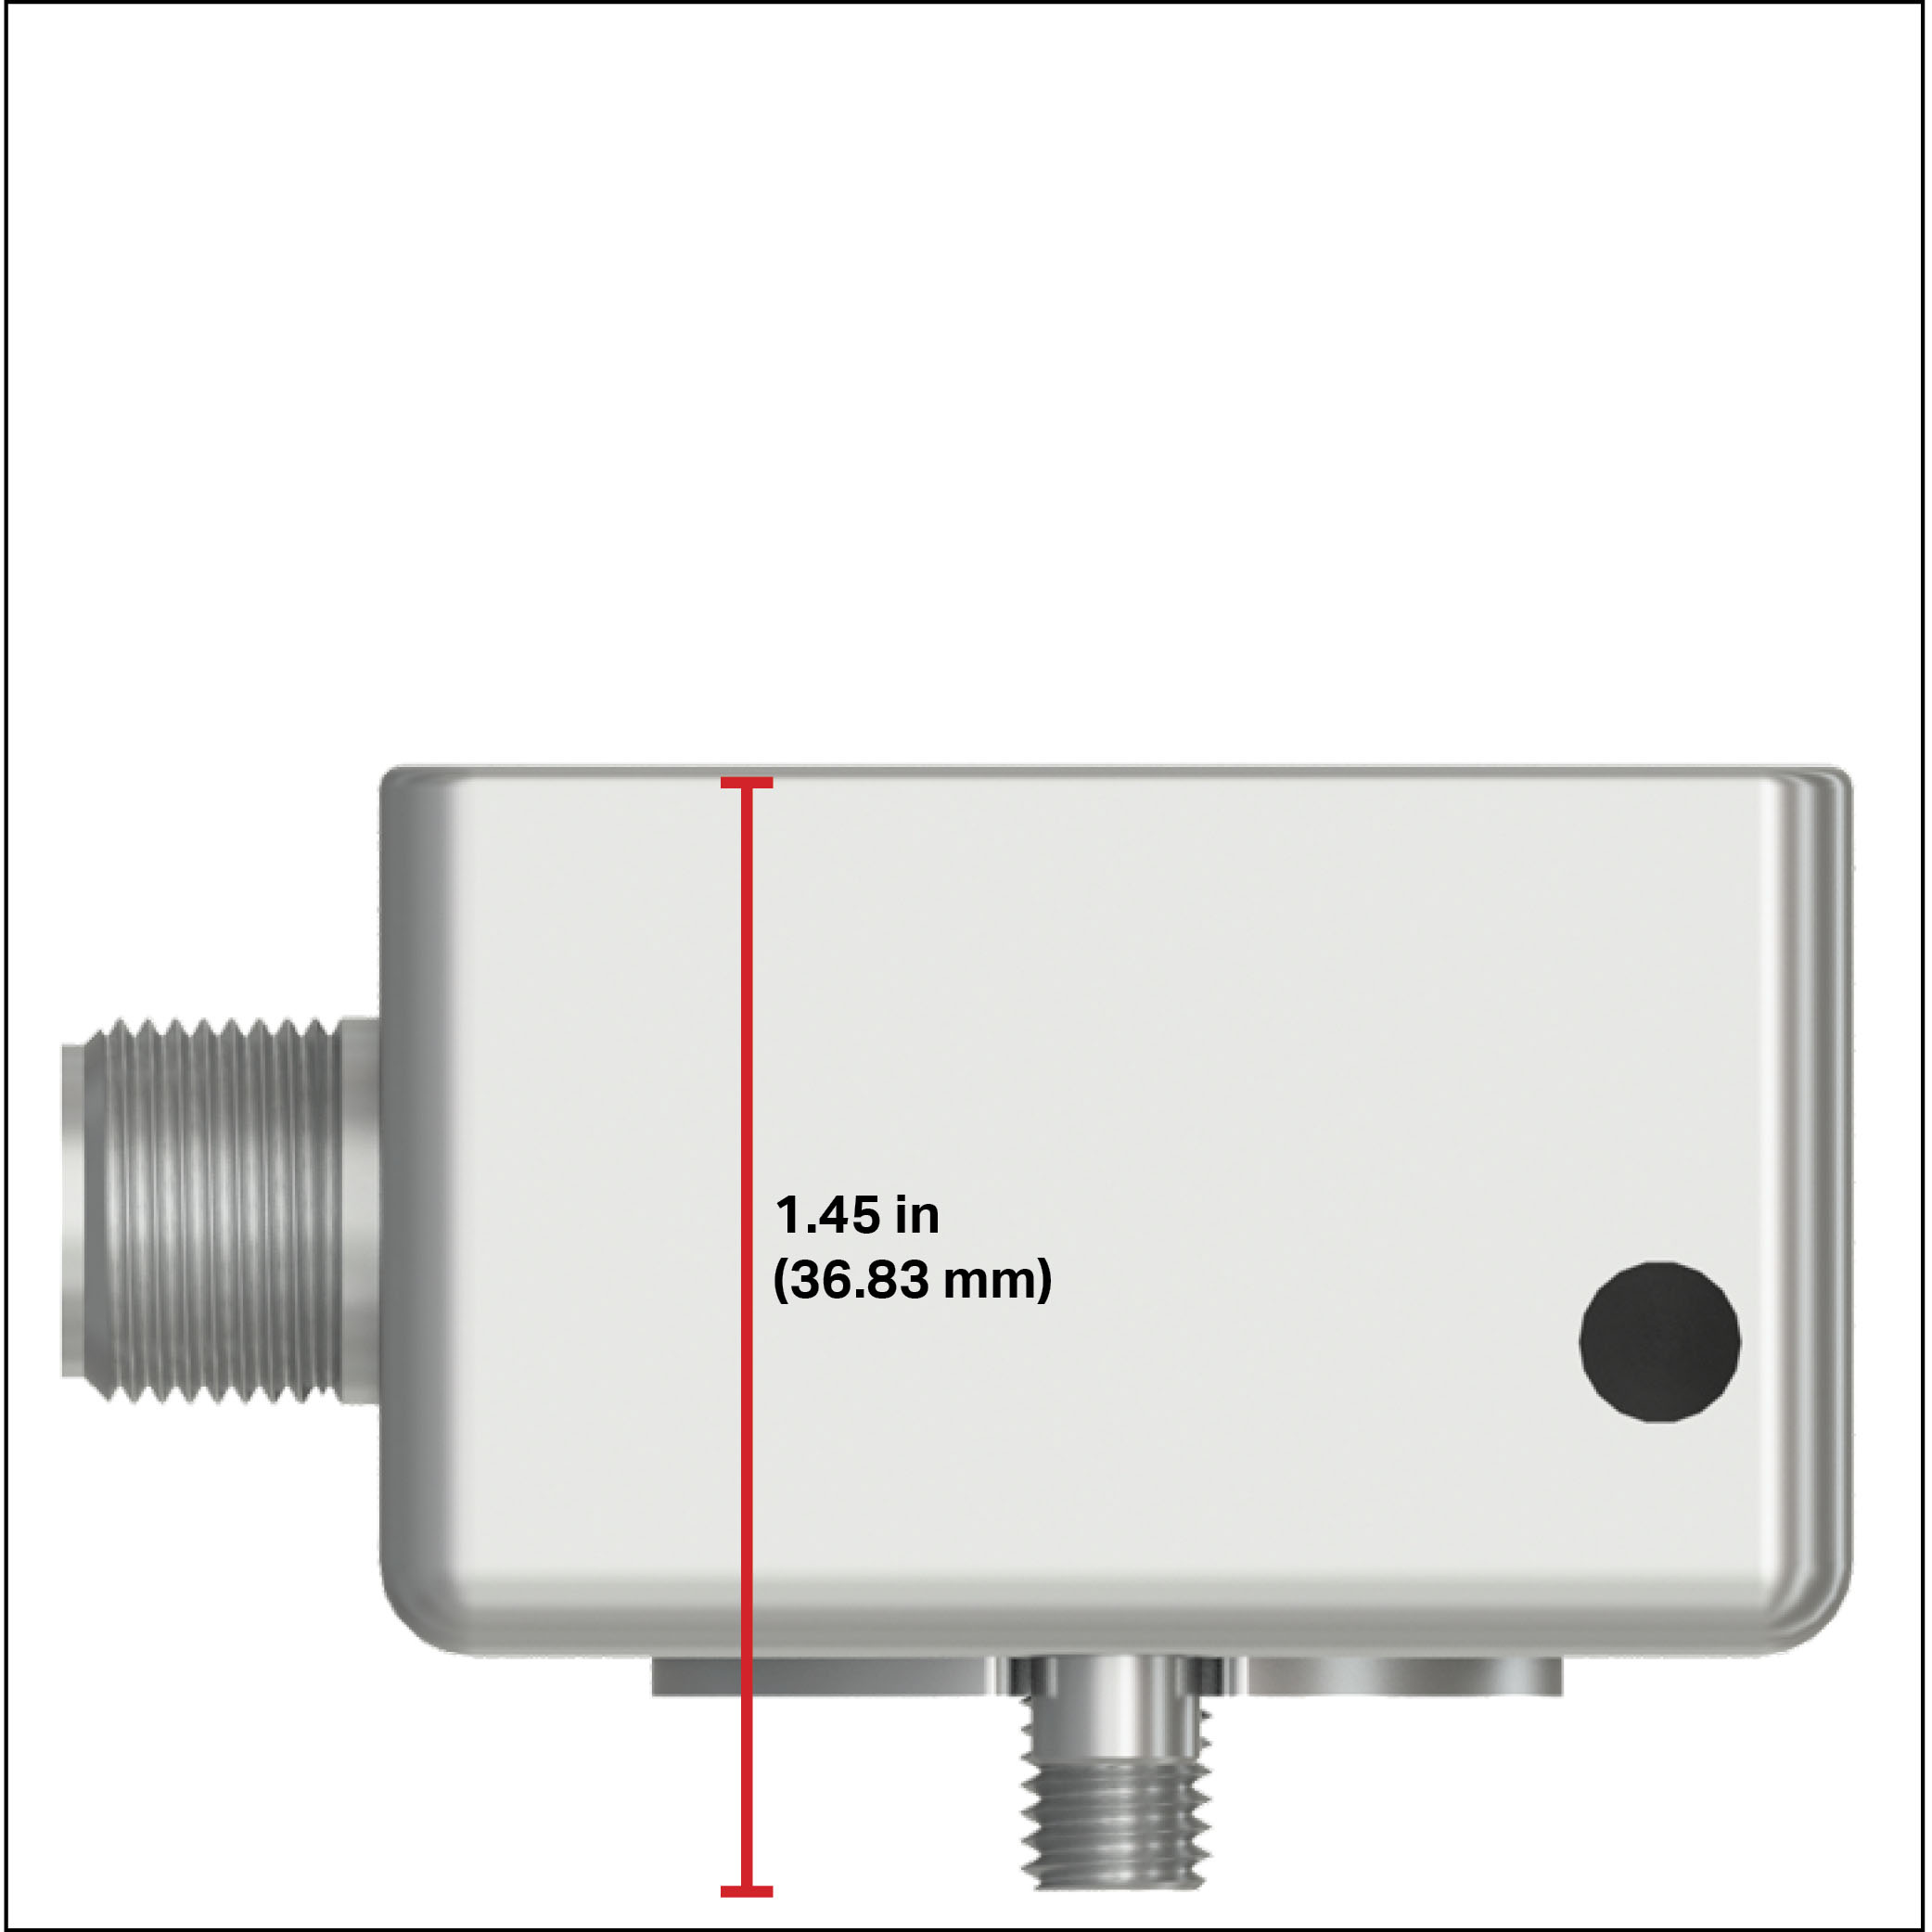 TXFA311 large size triaxial accelerometer with a height dimension of 1.45 inches shown.